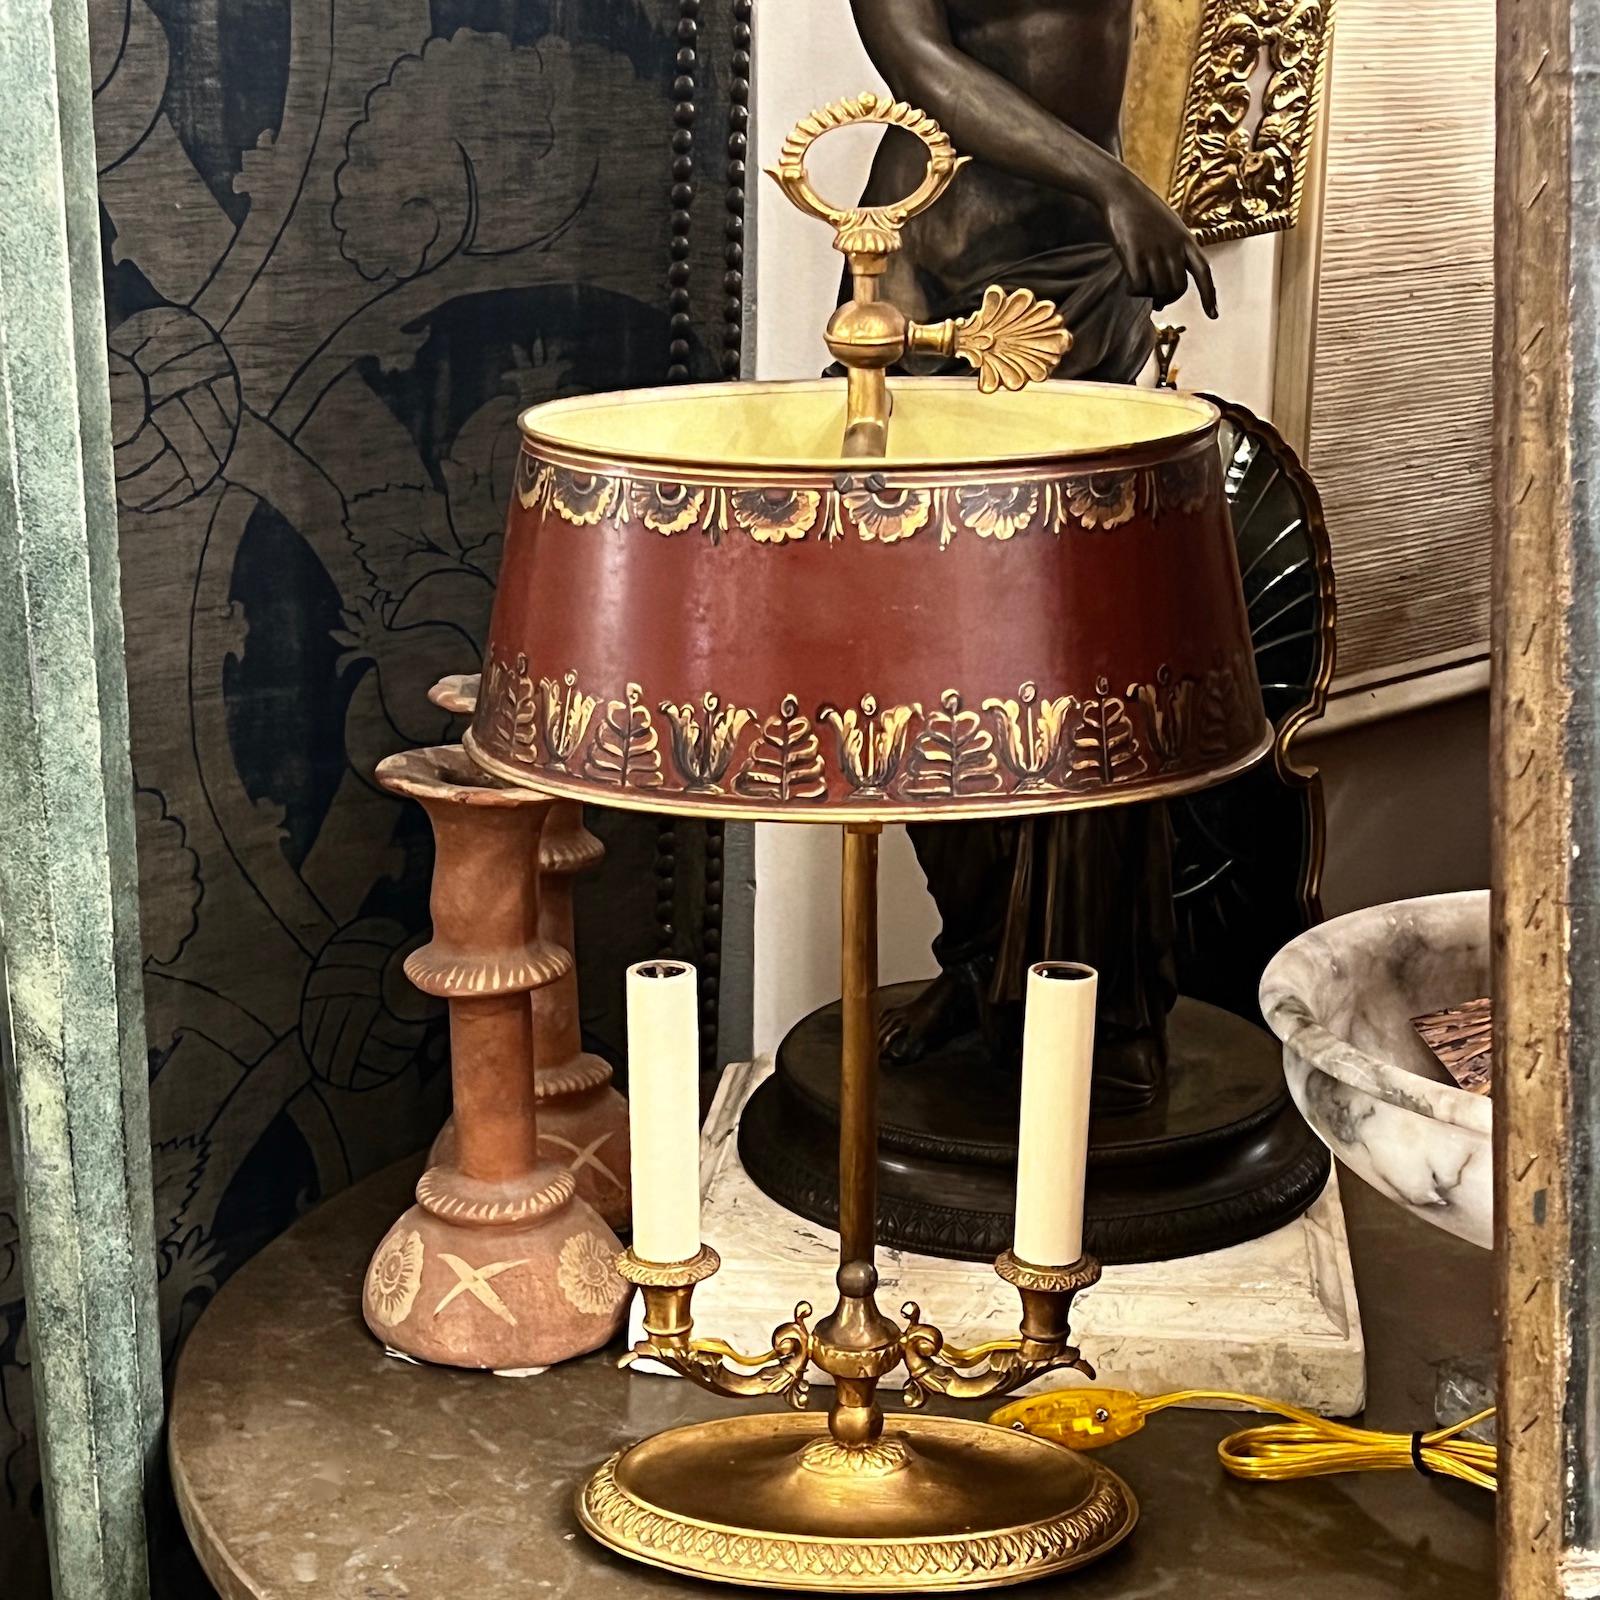 A circa 1910 French bronze desk lamp with original painted shade.

Measurements:
Height: 19.5